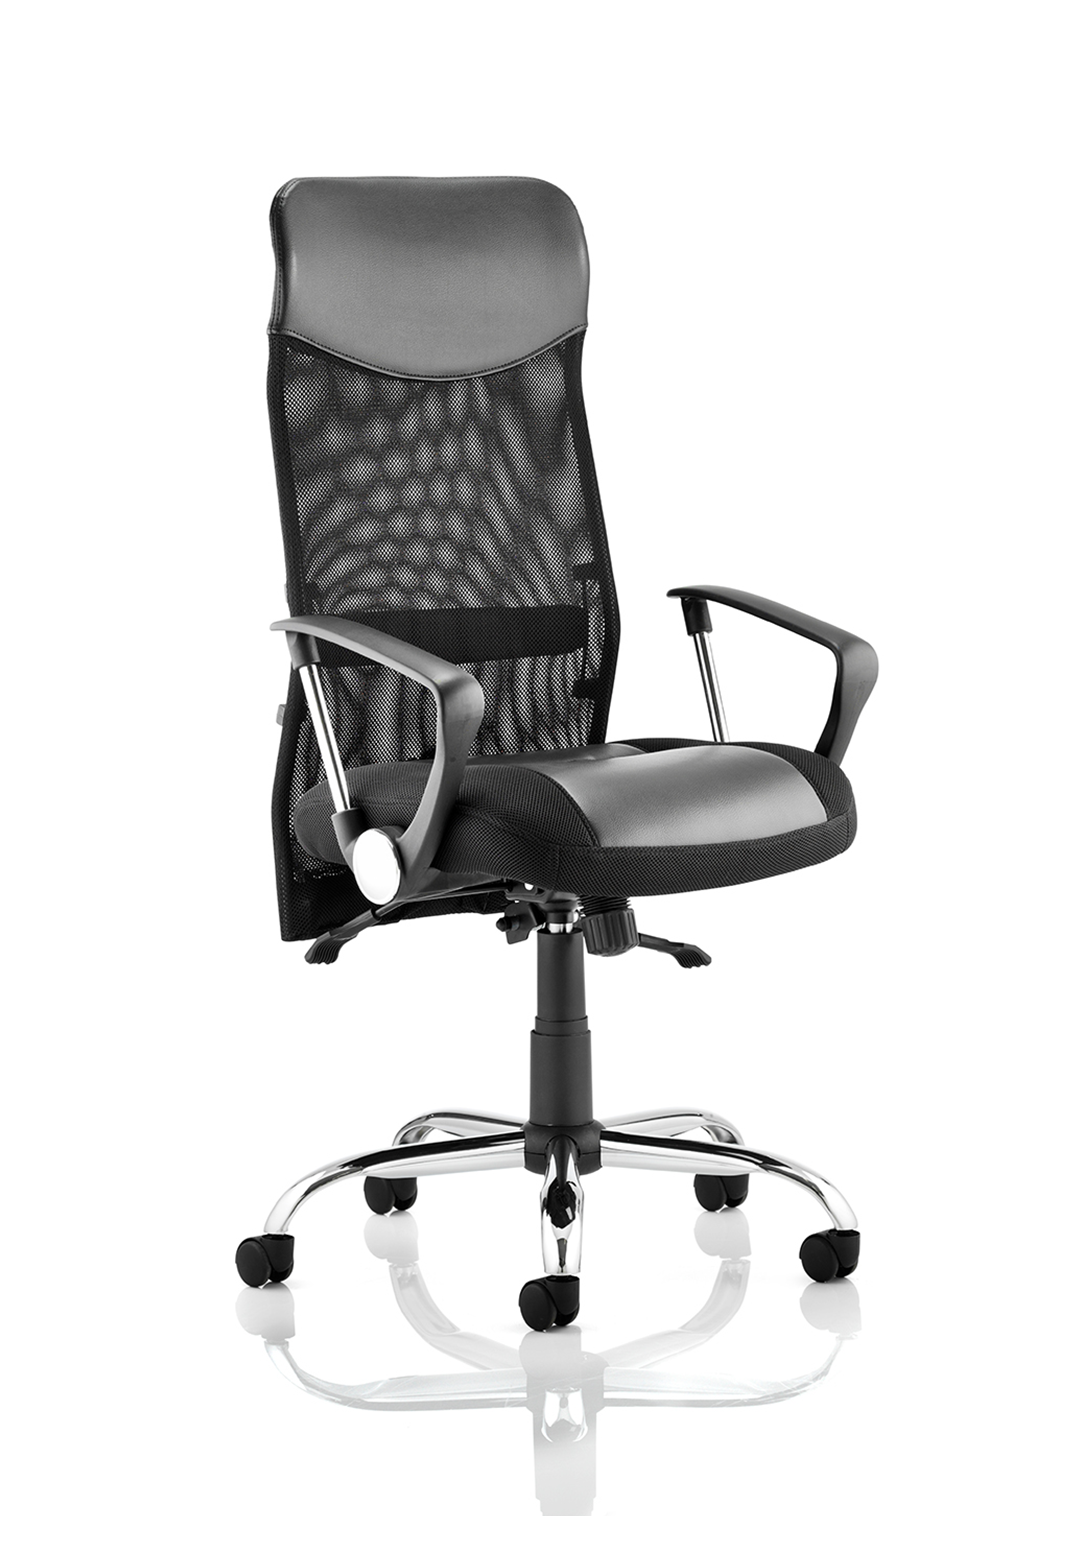 Vegas Exec Home Office Chair | Executive Chair | Home Office Furniture | Leather and Mesh Chair | Chrome detail | Swivel Chair | Swivel Chair with mesh